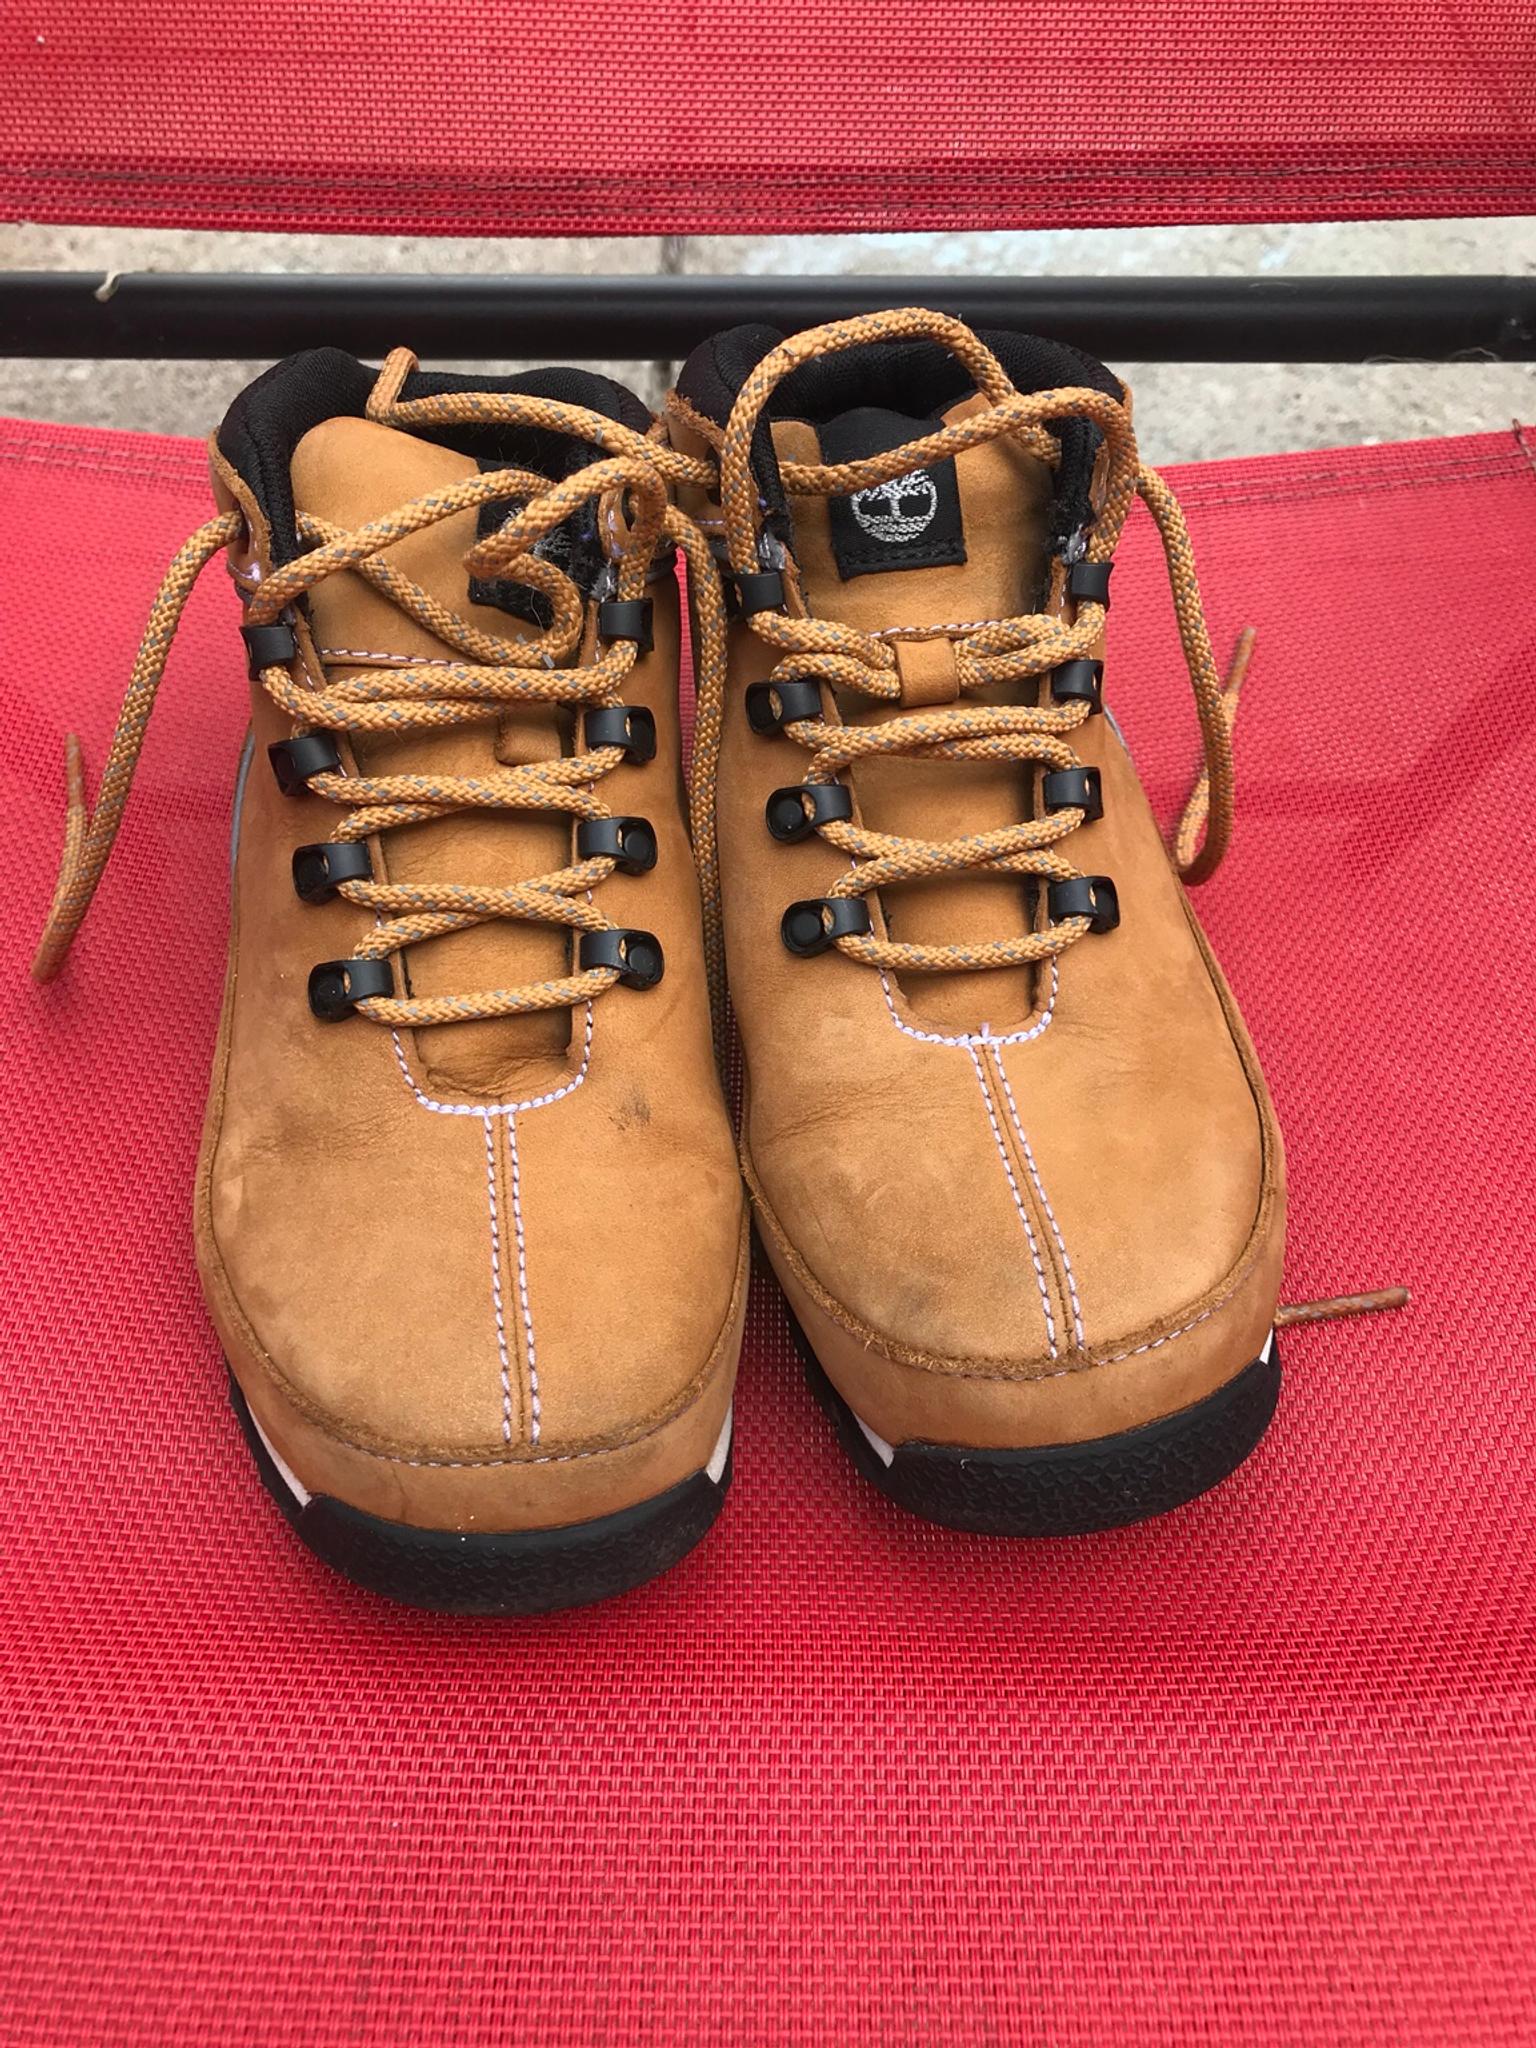 Timberland boots in CV6 Coventry for 